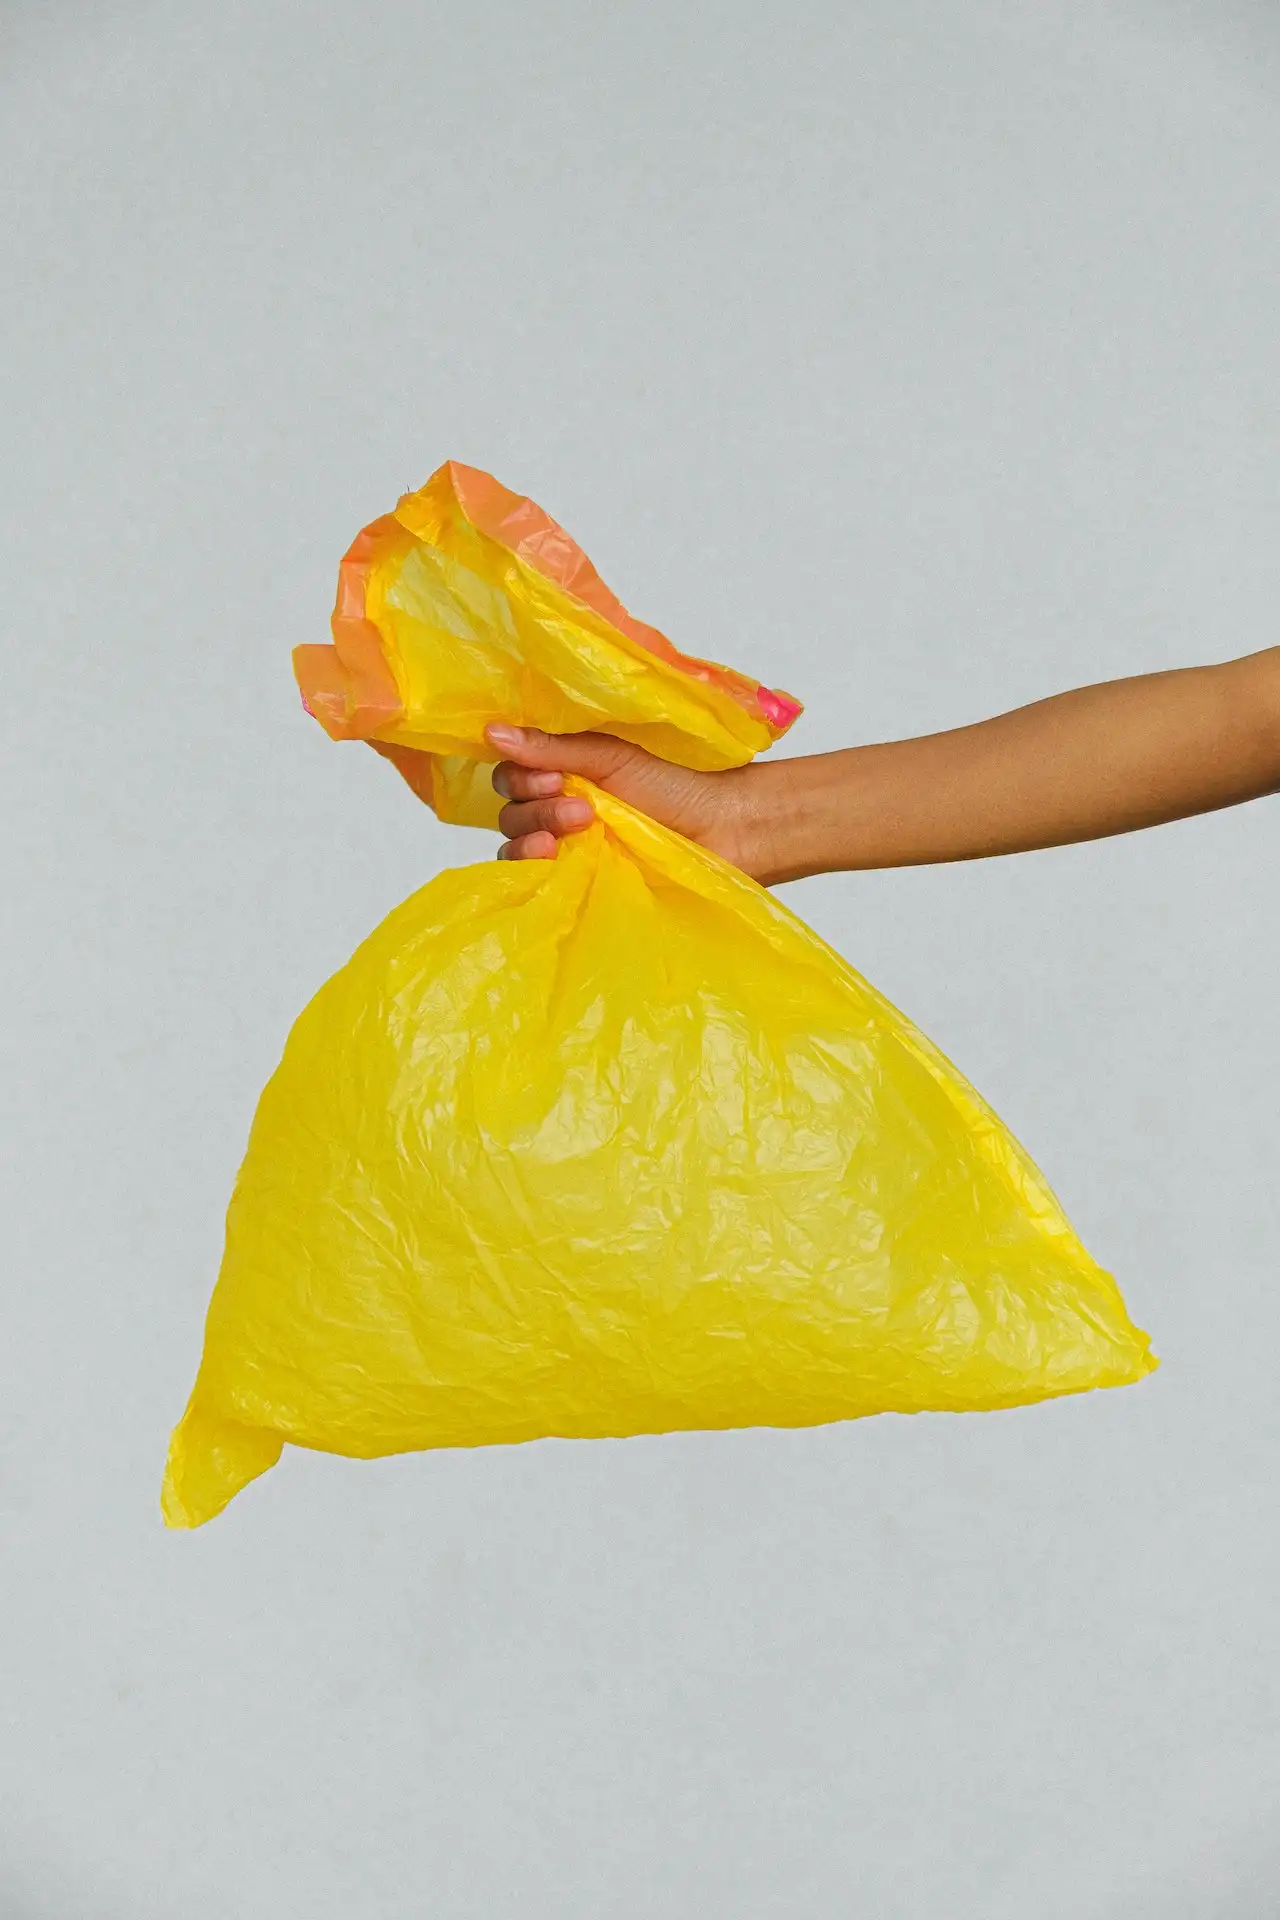 Picture of a person holding a garbage bag taking it to the dump in Madison, North Carolina.